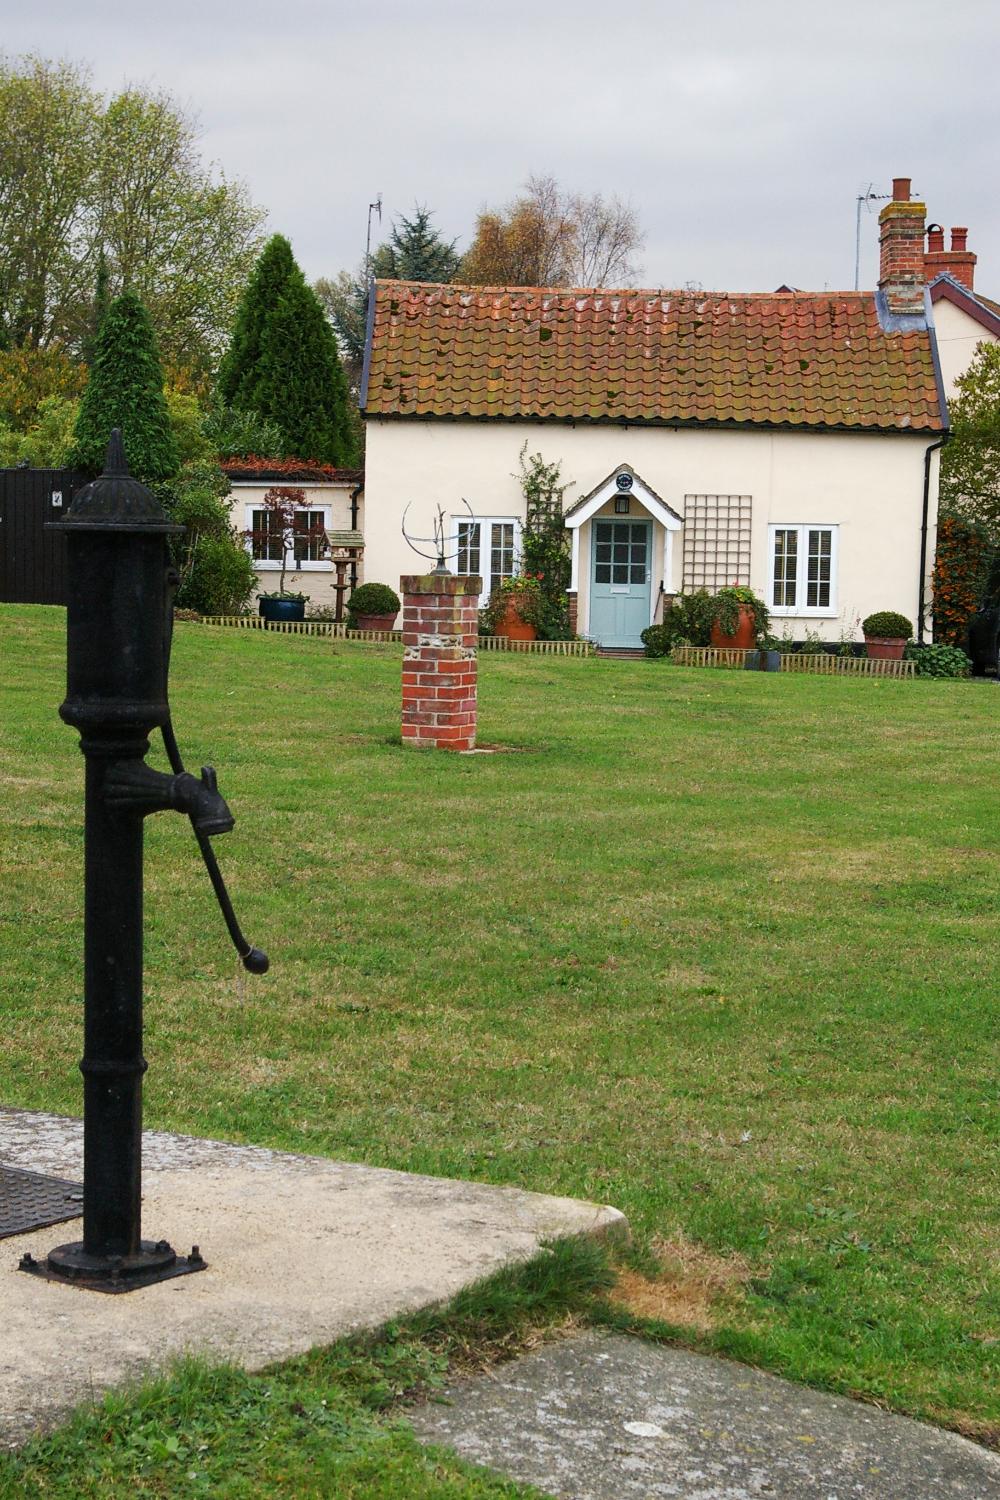 Pump and sun dial on the village green.